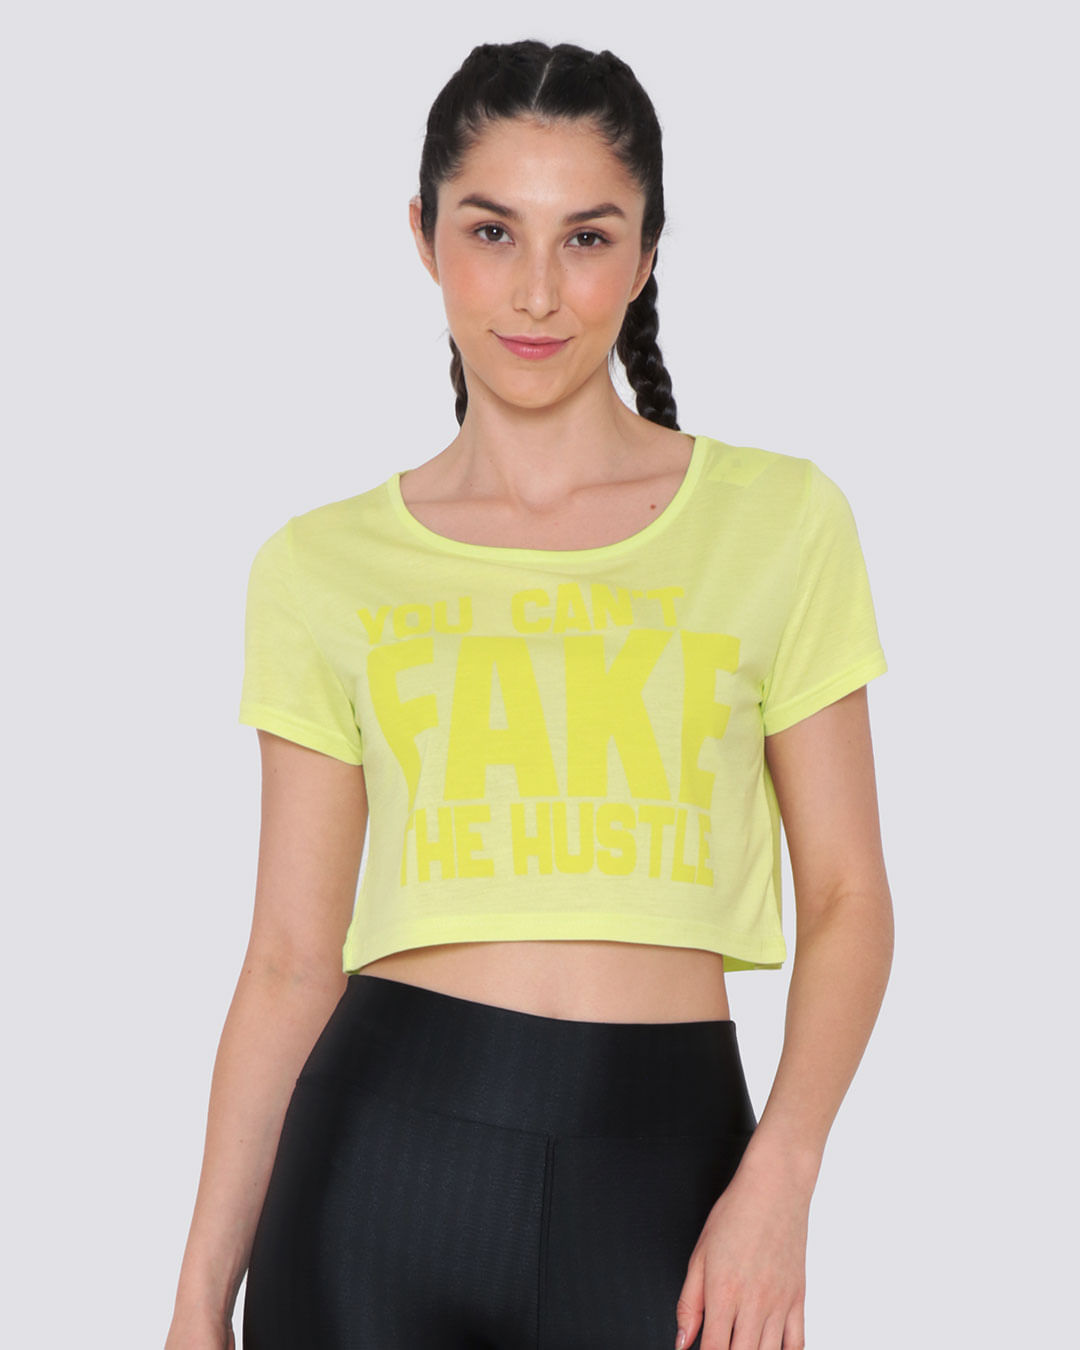 Blusa Cropped Fitness Fitter Neon Verde